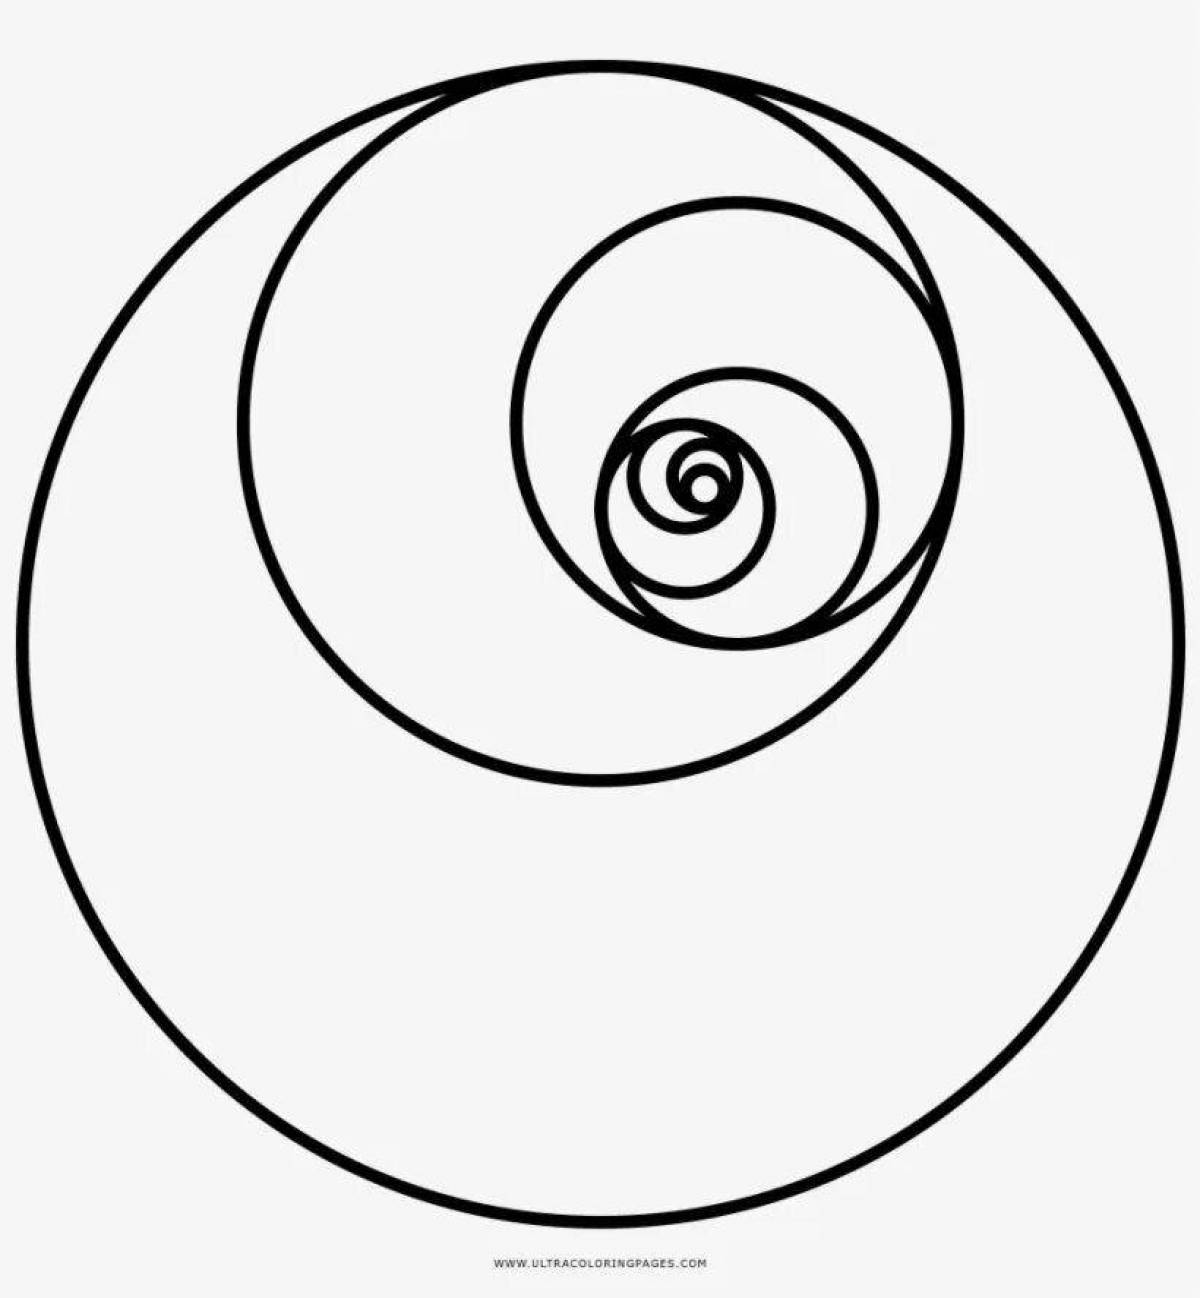 Coloring book magical spiral pattern